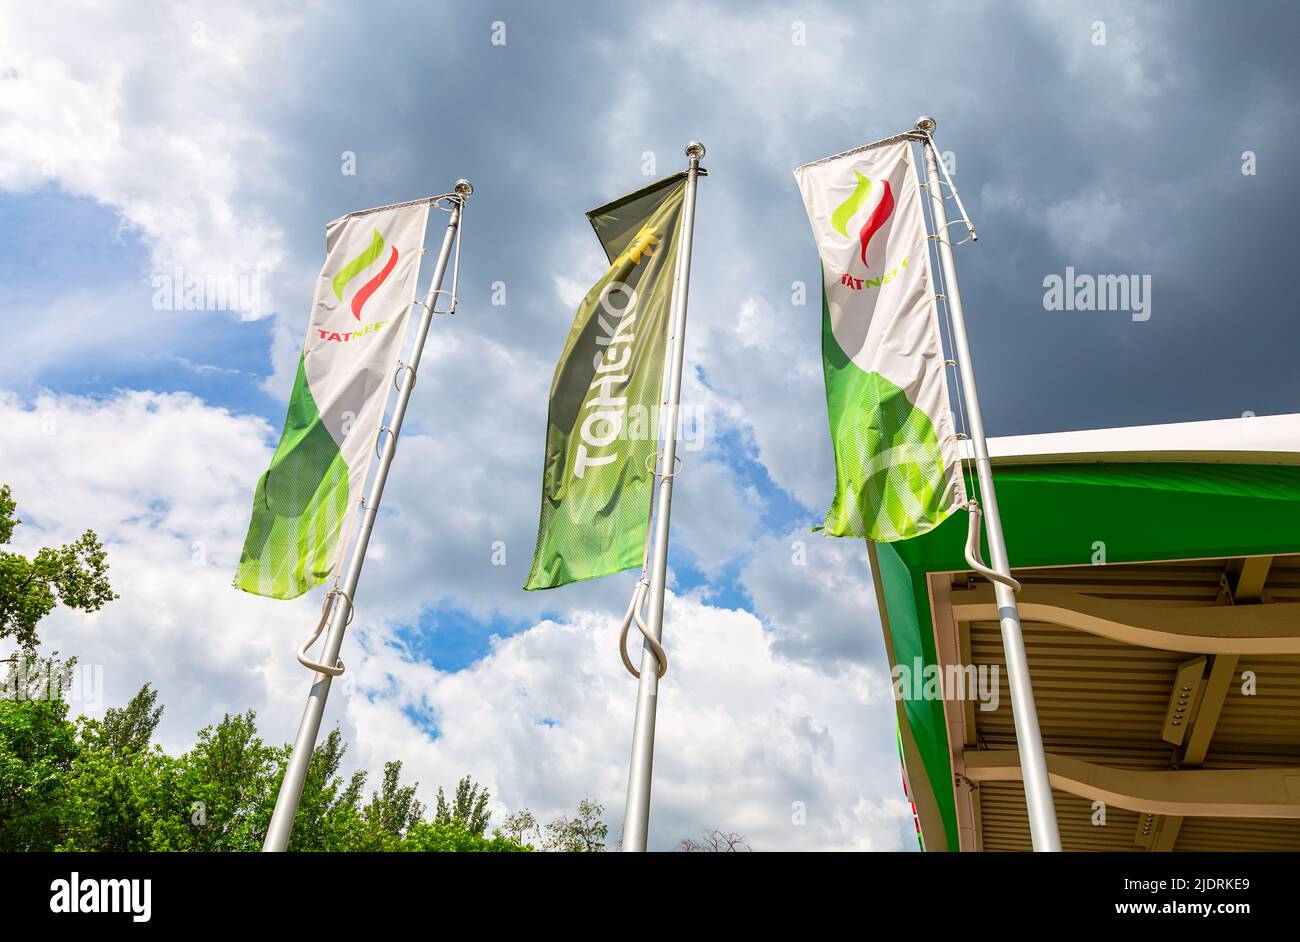 Samara, Russia - June 18, 2022: Flags with emblem of the oil company Tatneft on the gas station. Tatneft is one of the russian oil companies Stock Photo